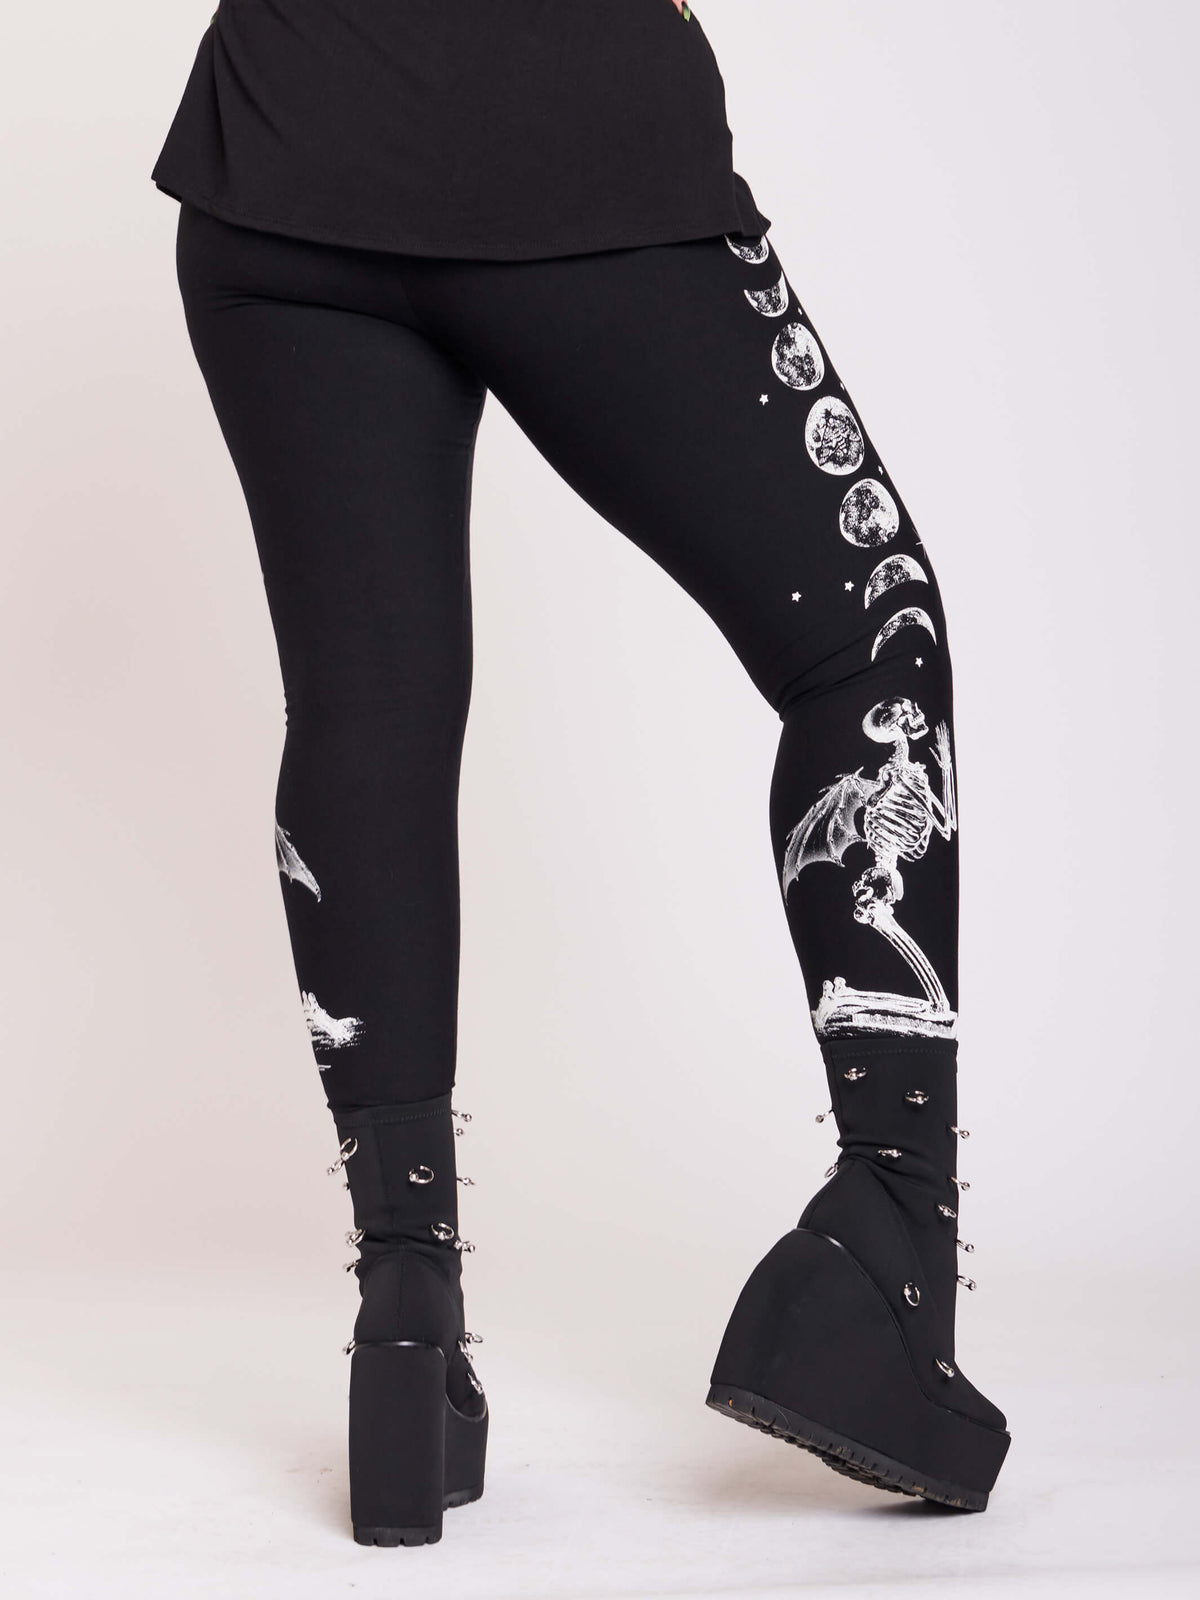 BLACK LEGGING WITH WHITE GRAPHIC FEATURING PRAYING SKELTON AND MOON PHASE